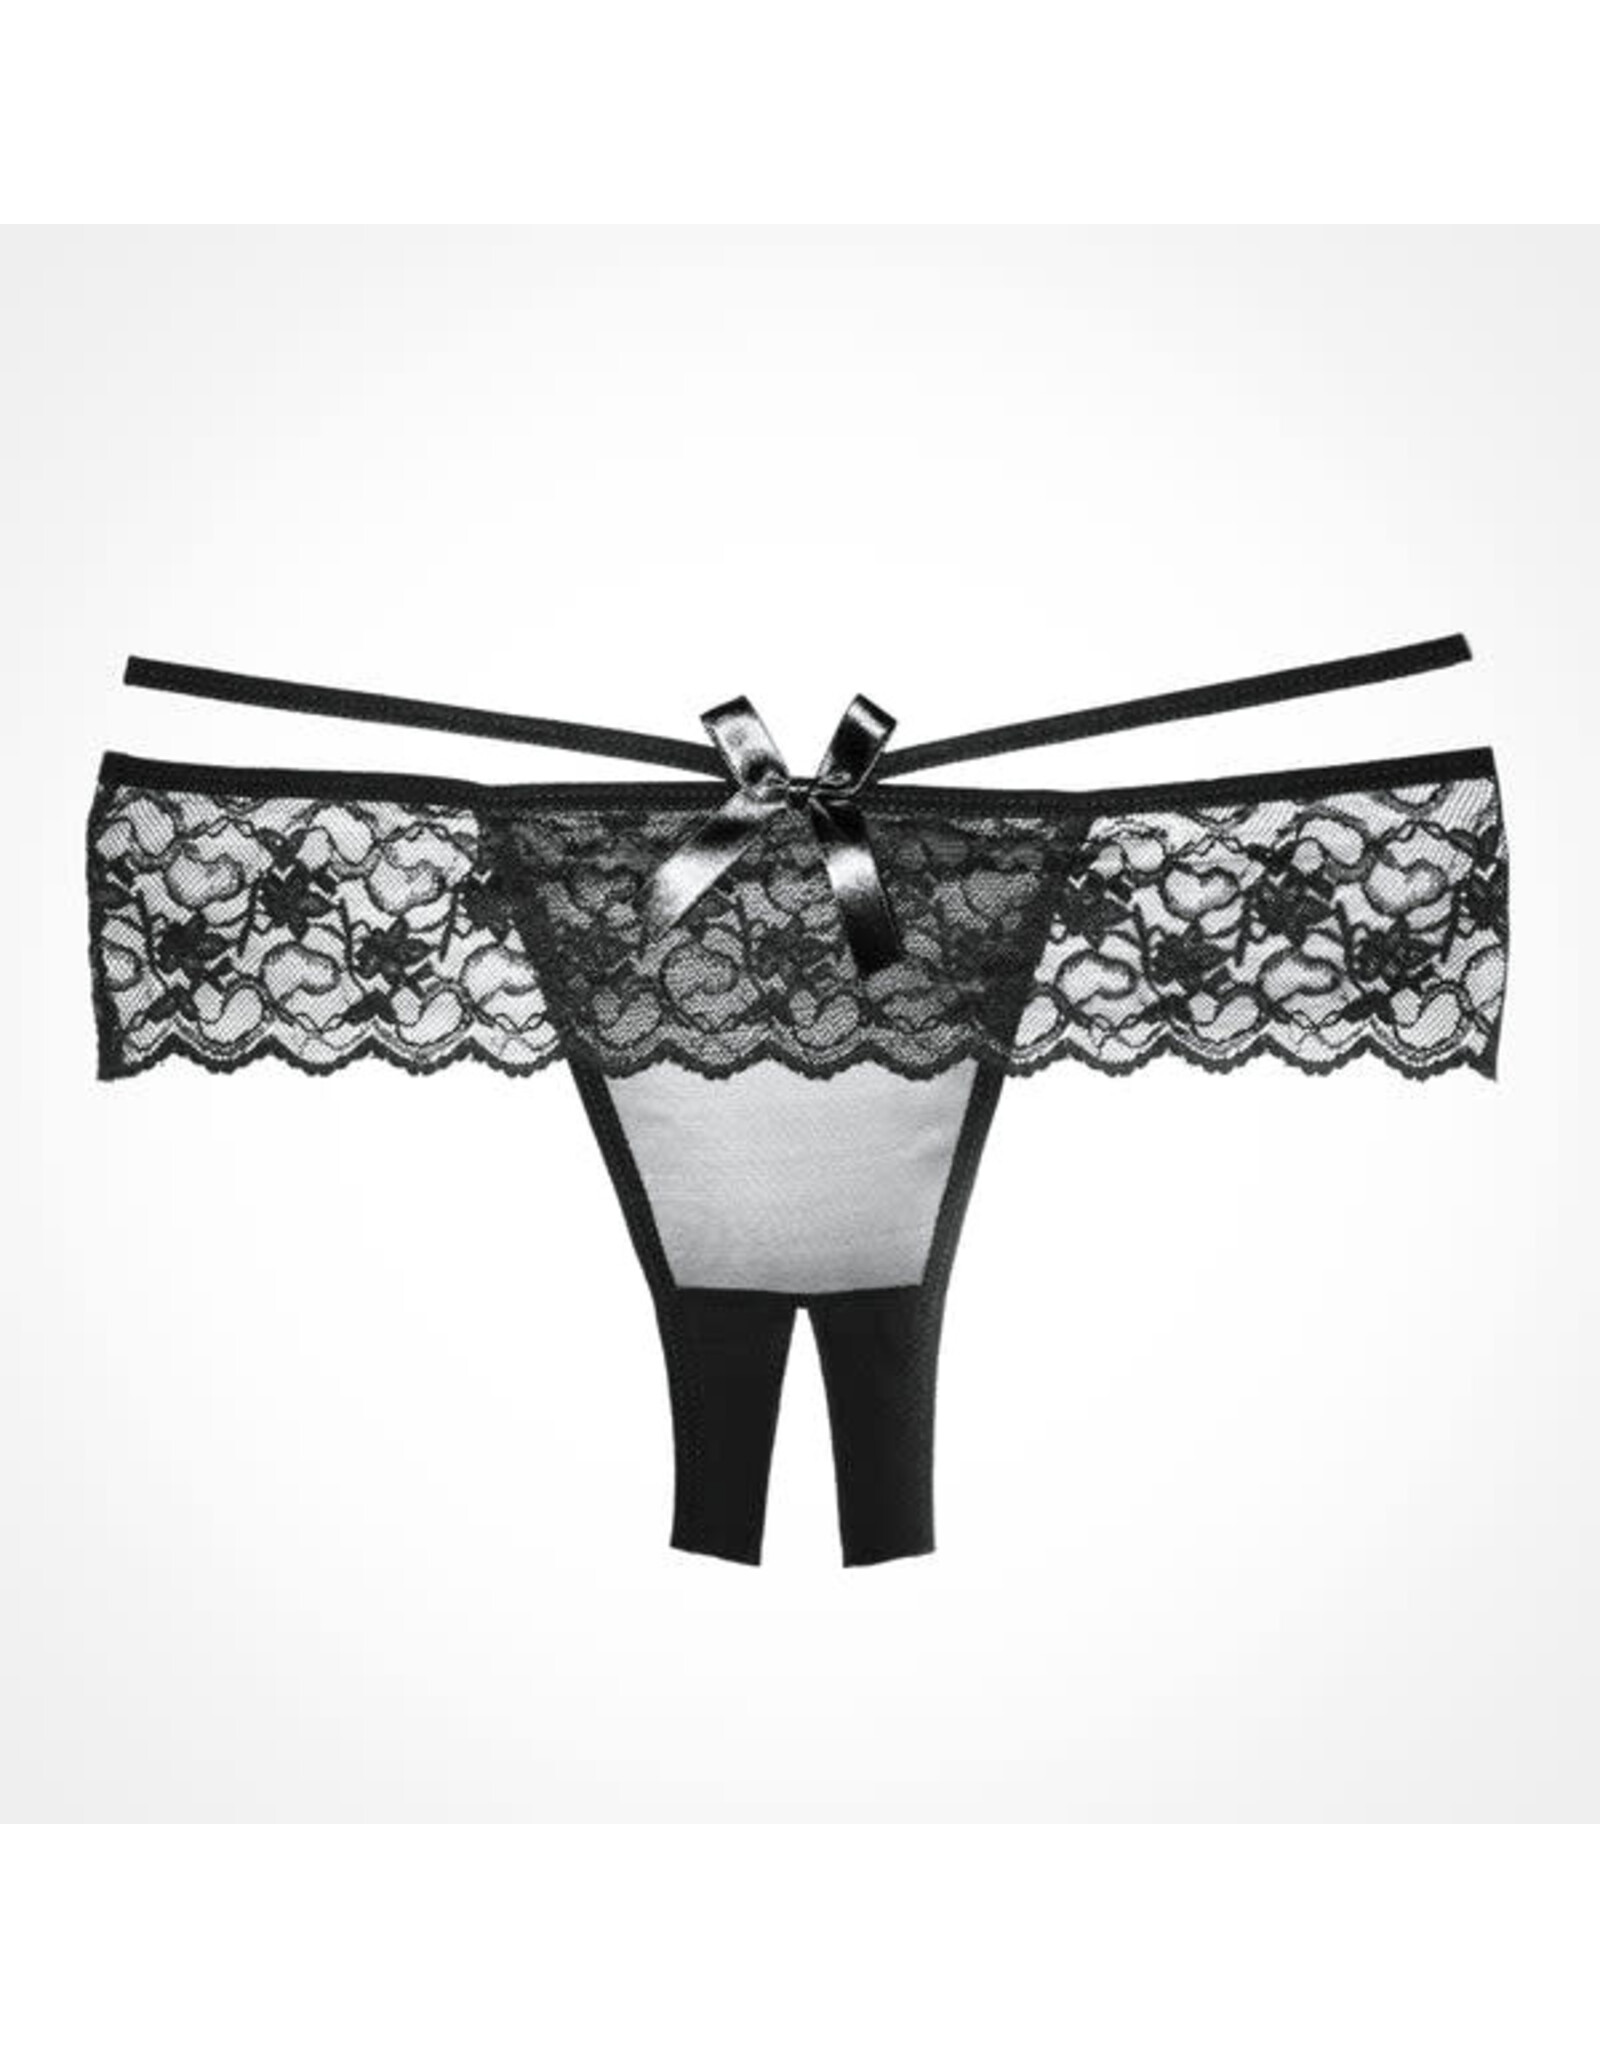 Allure Lingerie Adore by Allure - Angel Rhapsody Crotchless Panty - Black - OS